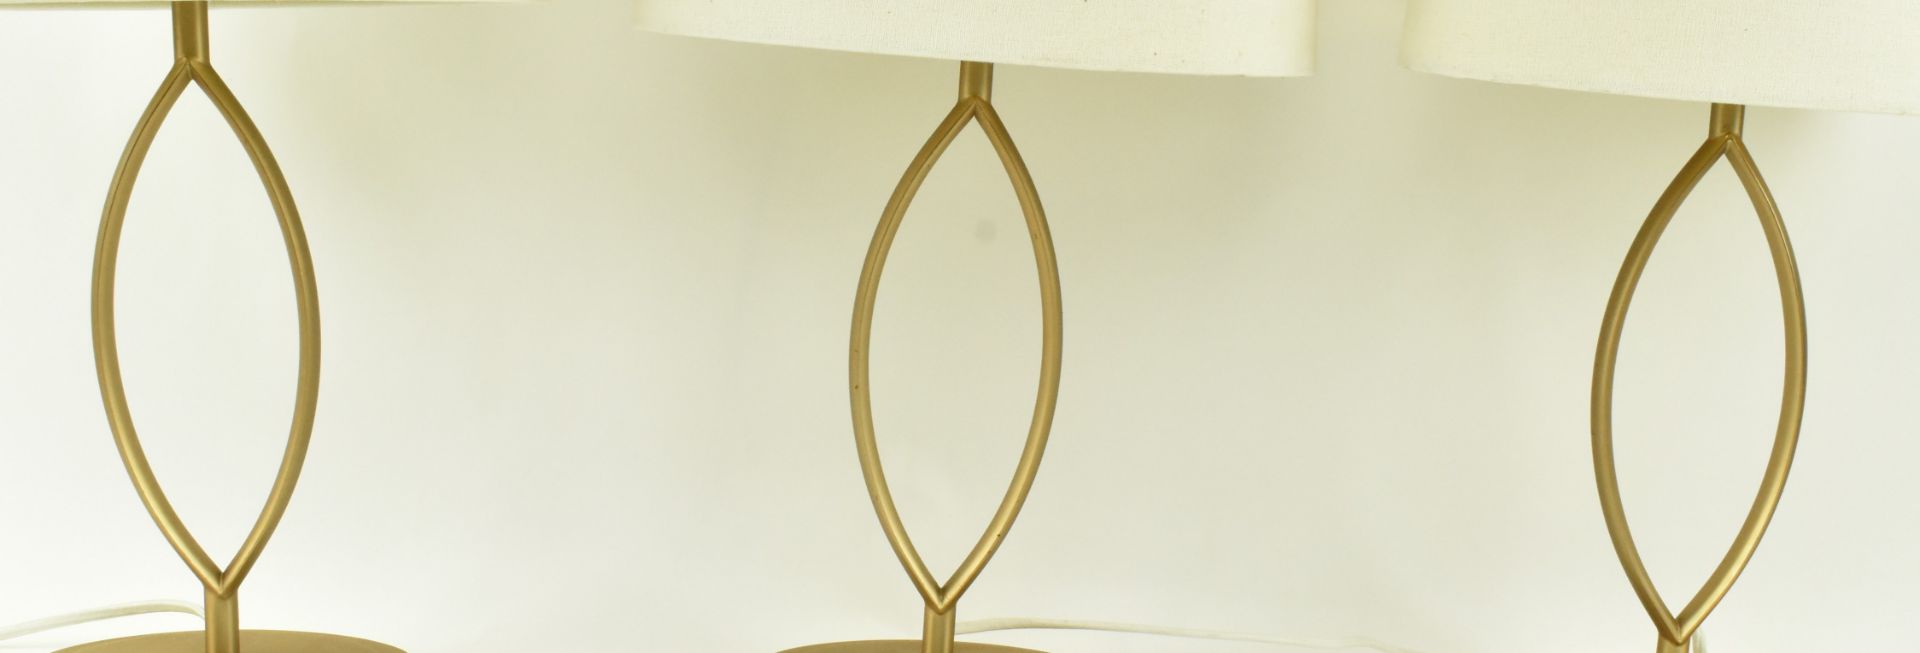 THREE HIGH END DESIGN CHROME GOLD METAL ABSTRACT DESK LAMPS - Image 3 of 6